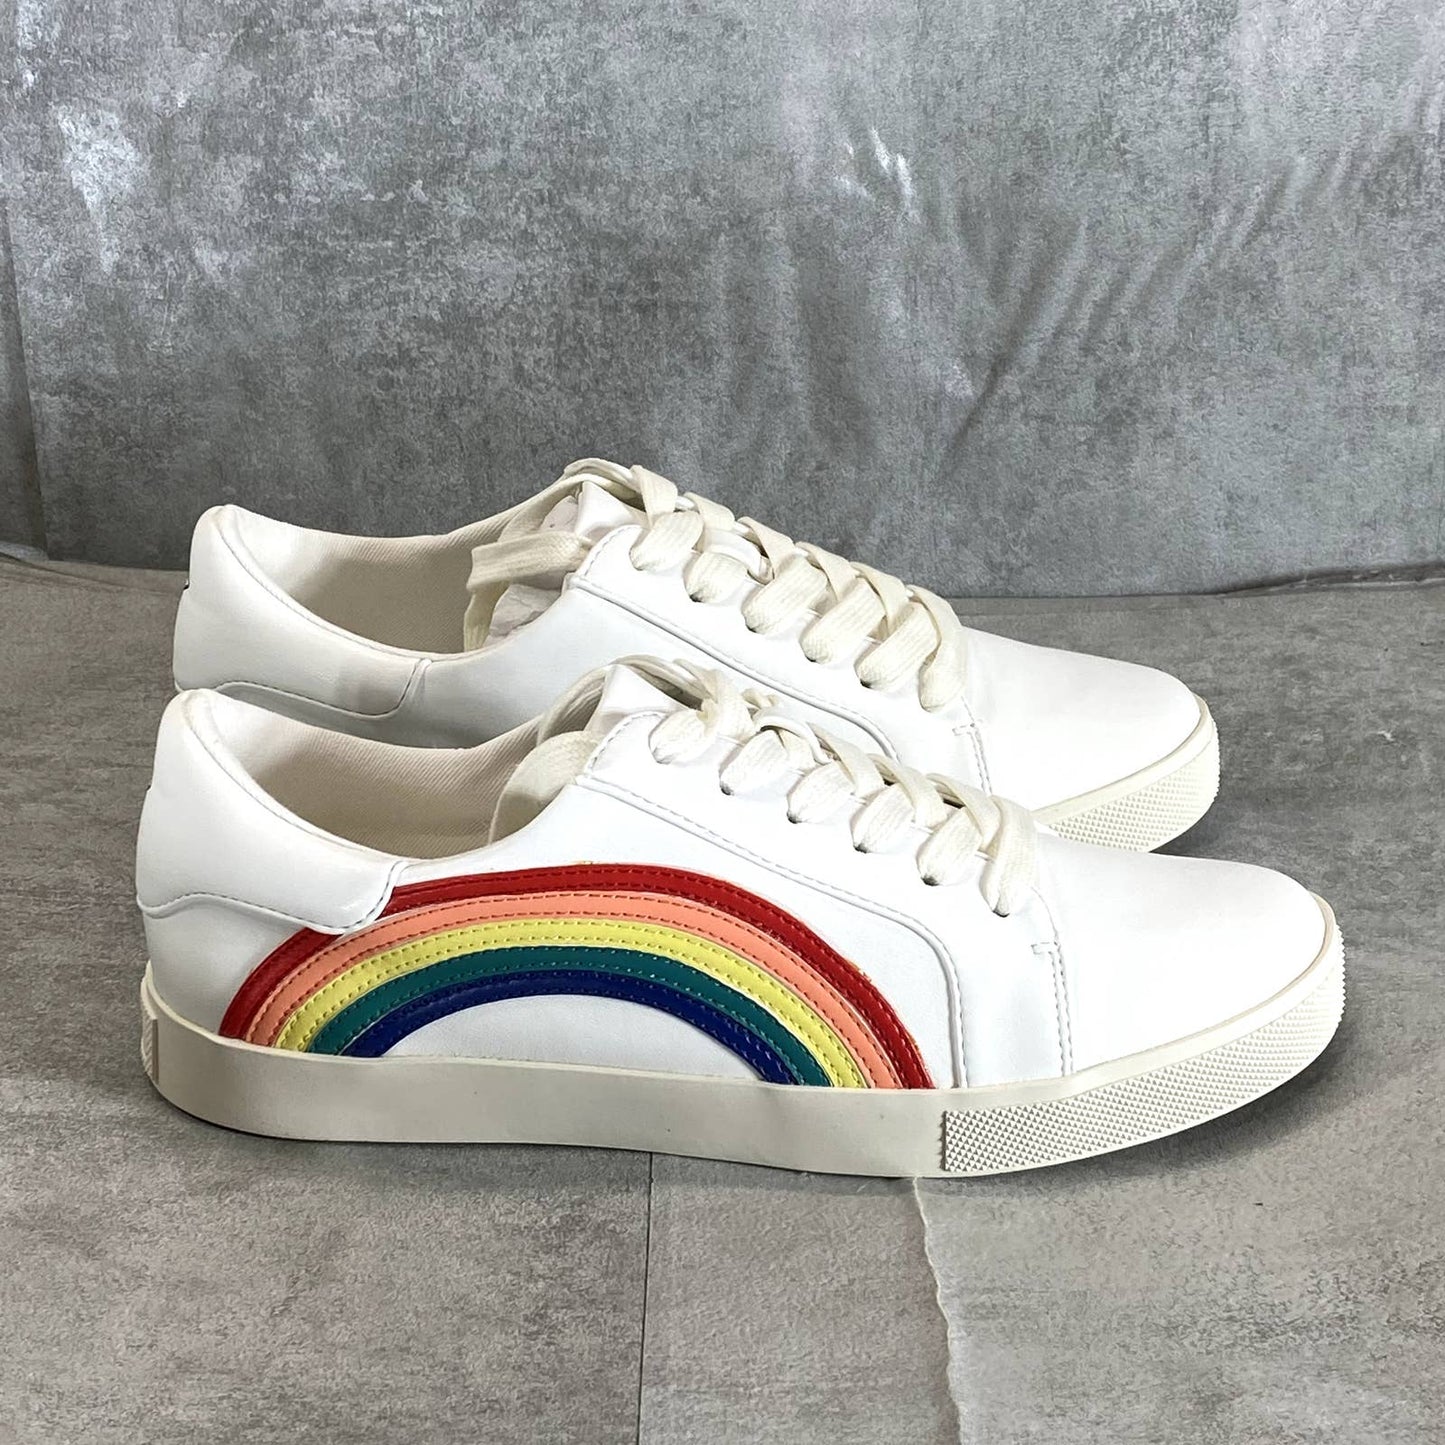 KATY PERRY Women's White Rainbow Multi The Rizzo Court Lace-Up Sneakers SZ 7